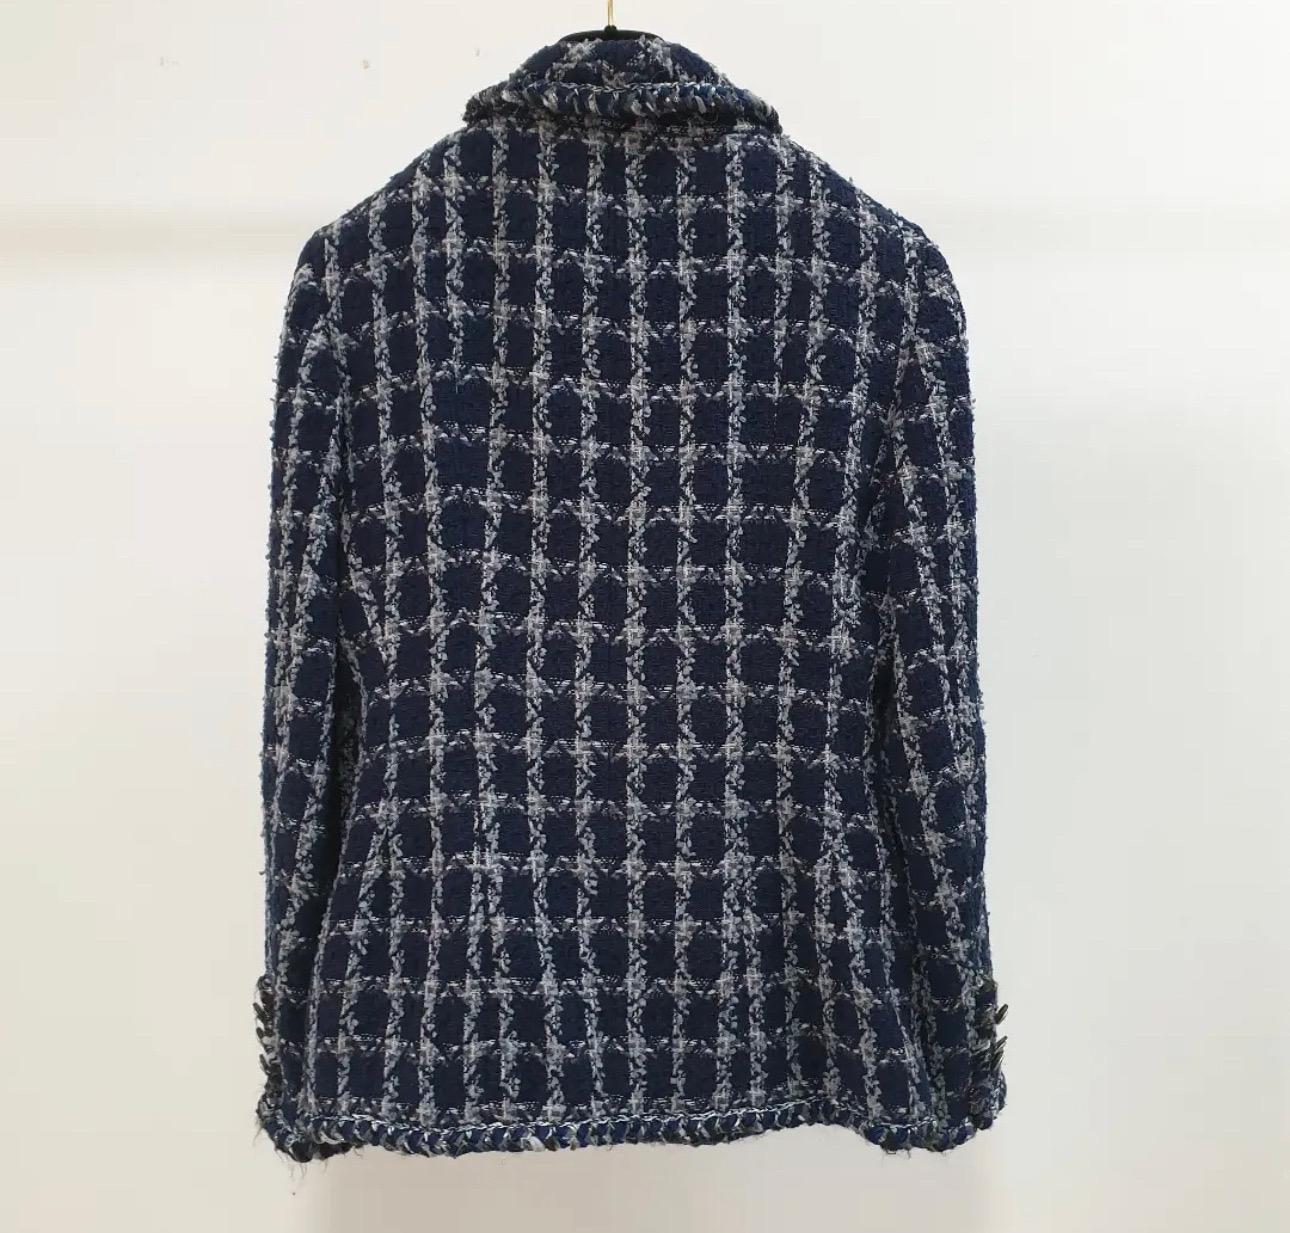 From the Pre-Fall 2014 Métiers d’Art Collection.
Blue Chanel tweed jacket with star-studded trim, tie detail at neck, long sleeves, two pockets and front zip closure.
Sz.42
Very good condition.
